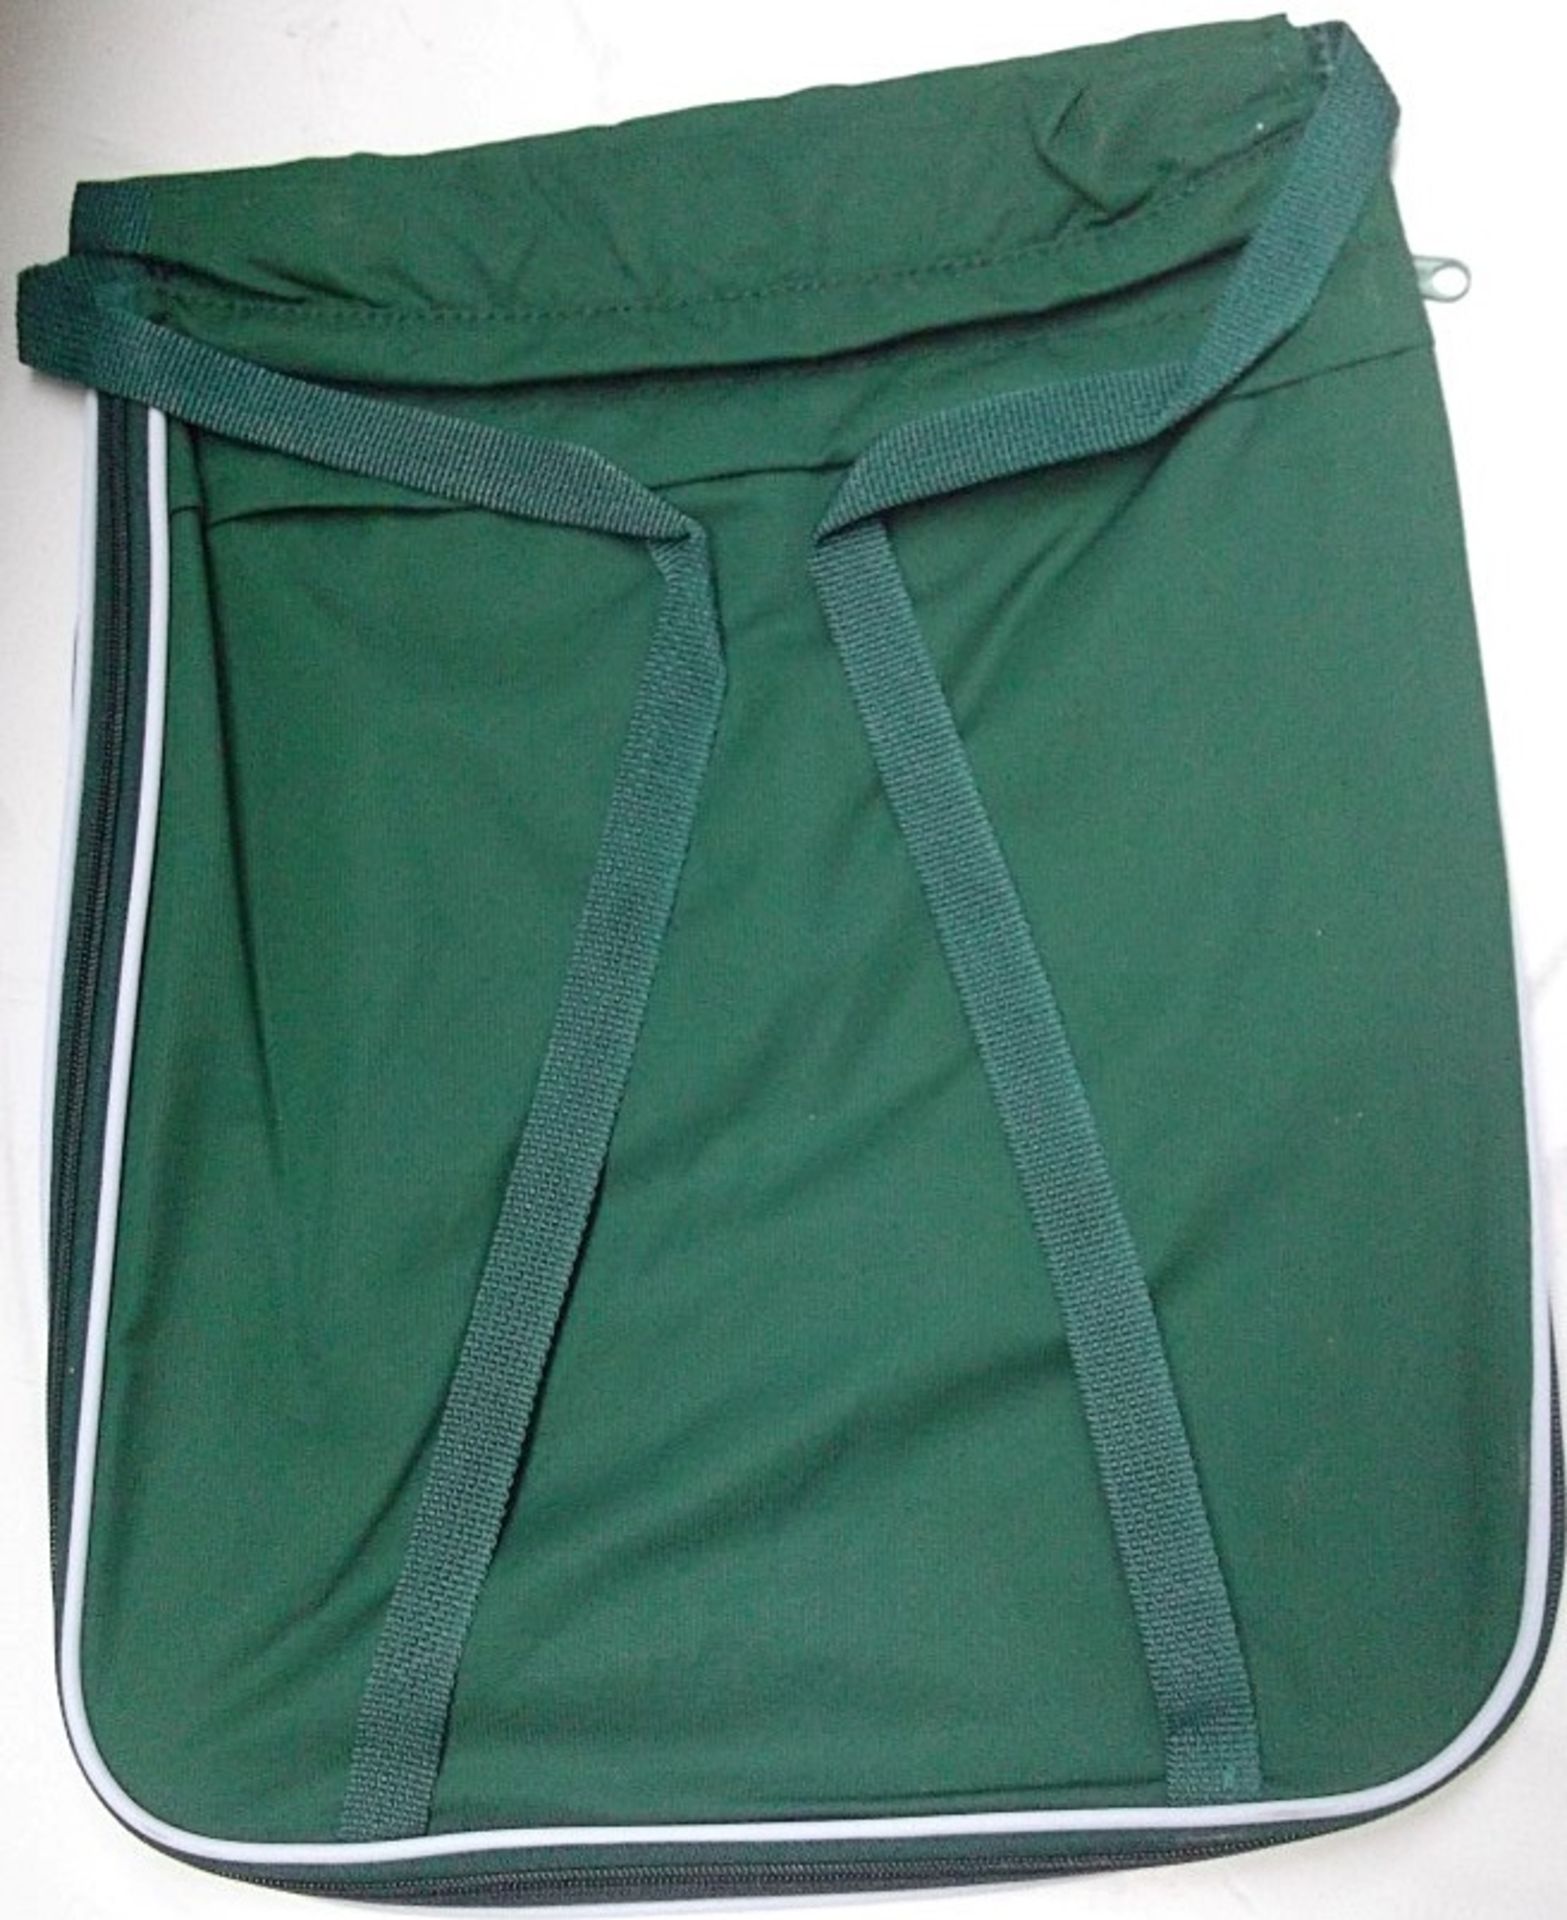 25 x CATERHAM F1 Nylon Backpacks - NEW & SEALED - Lined, With Dual Sholder Straps - CL155 - Ref: - Image 2 of 3